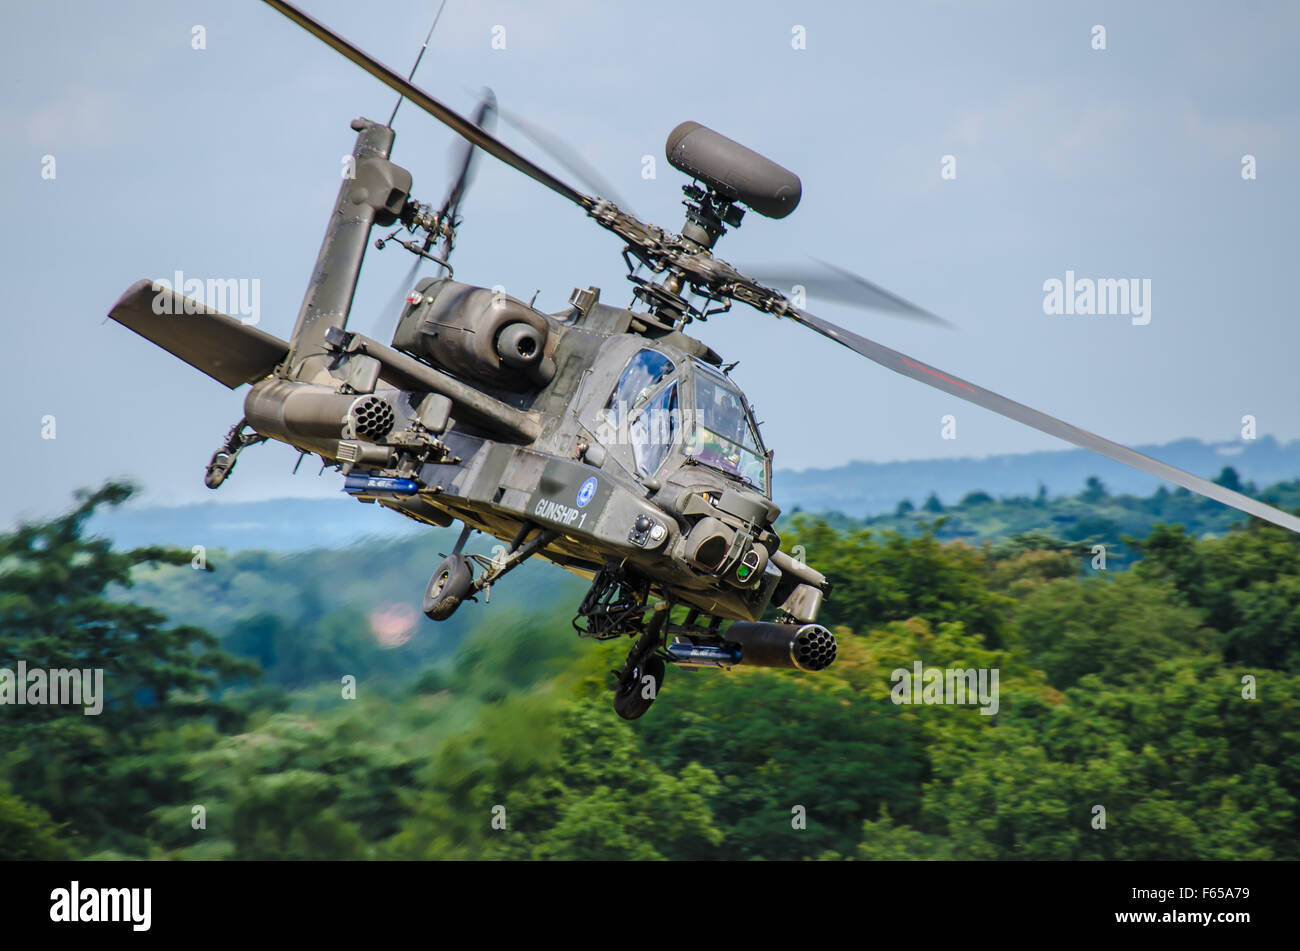 AgustaWestland Apache is a licence-built version of the AH-64D Apache Longbow attack helicopter for the British Army. Down in trees. Tank killer Stock Photo